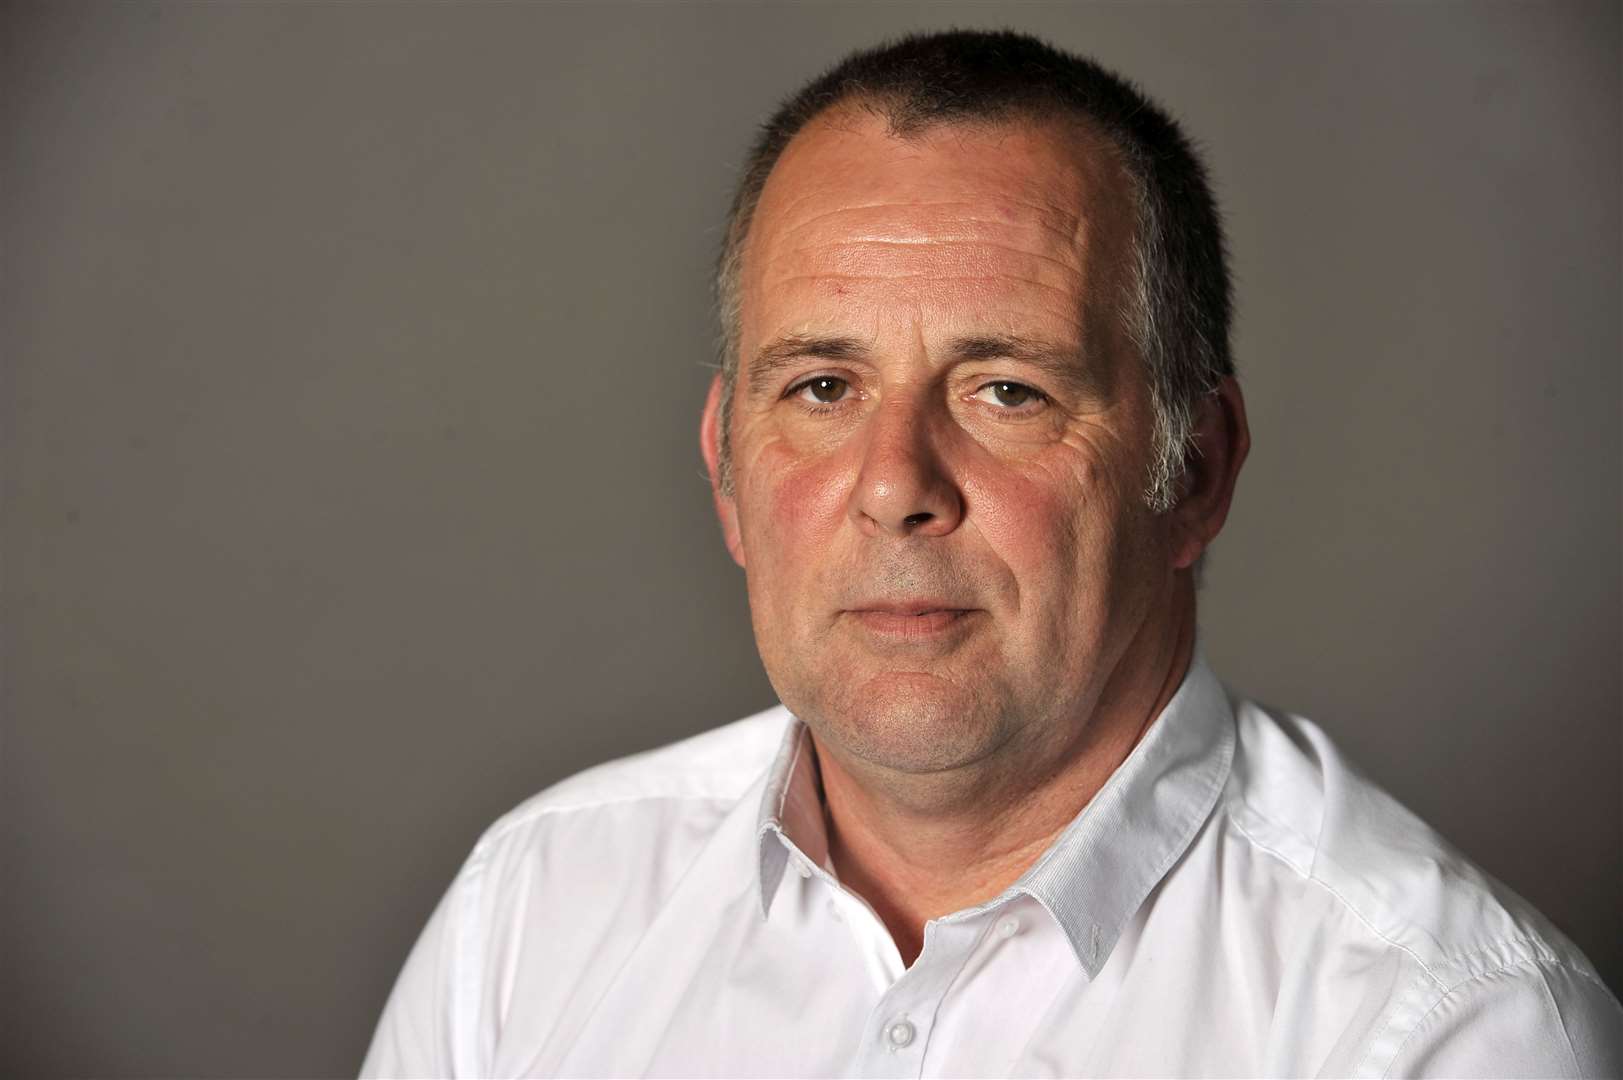 Medway Councillor Mick Pendergast is disappointed with the news